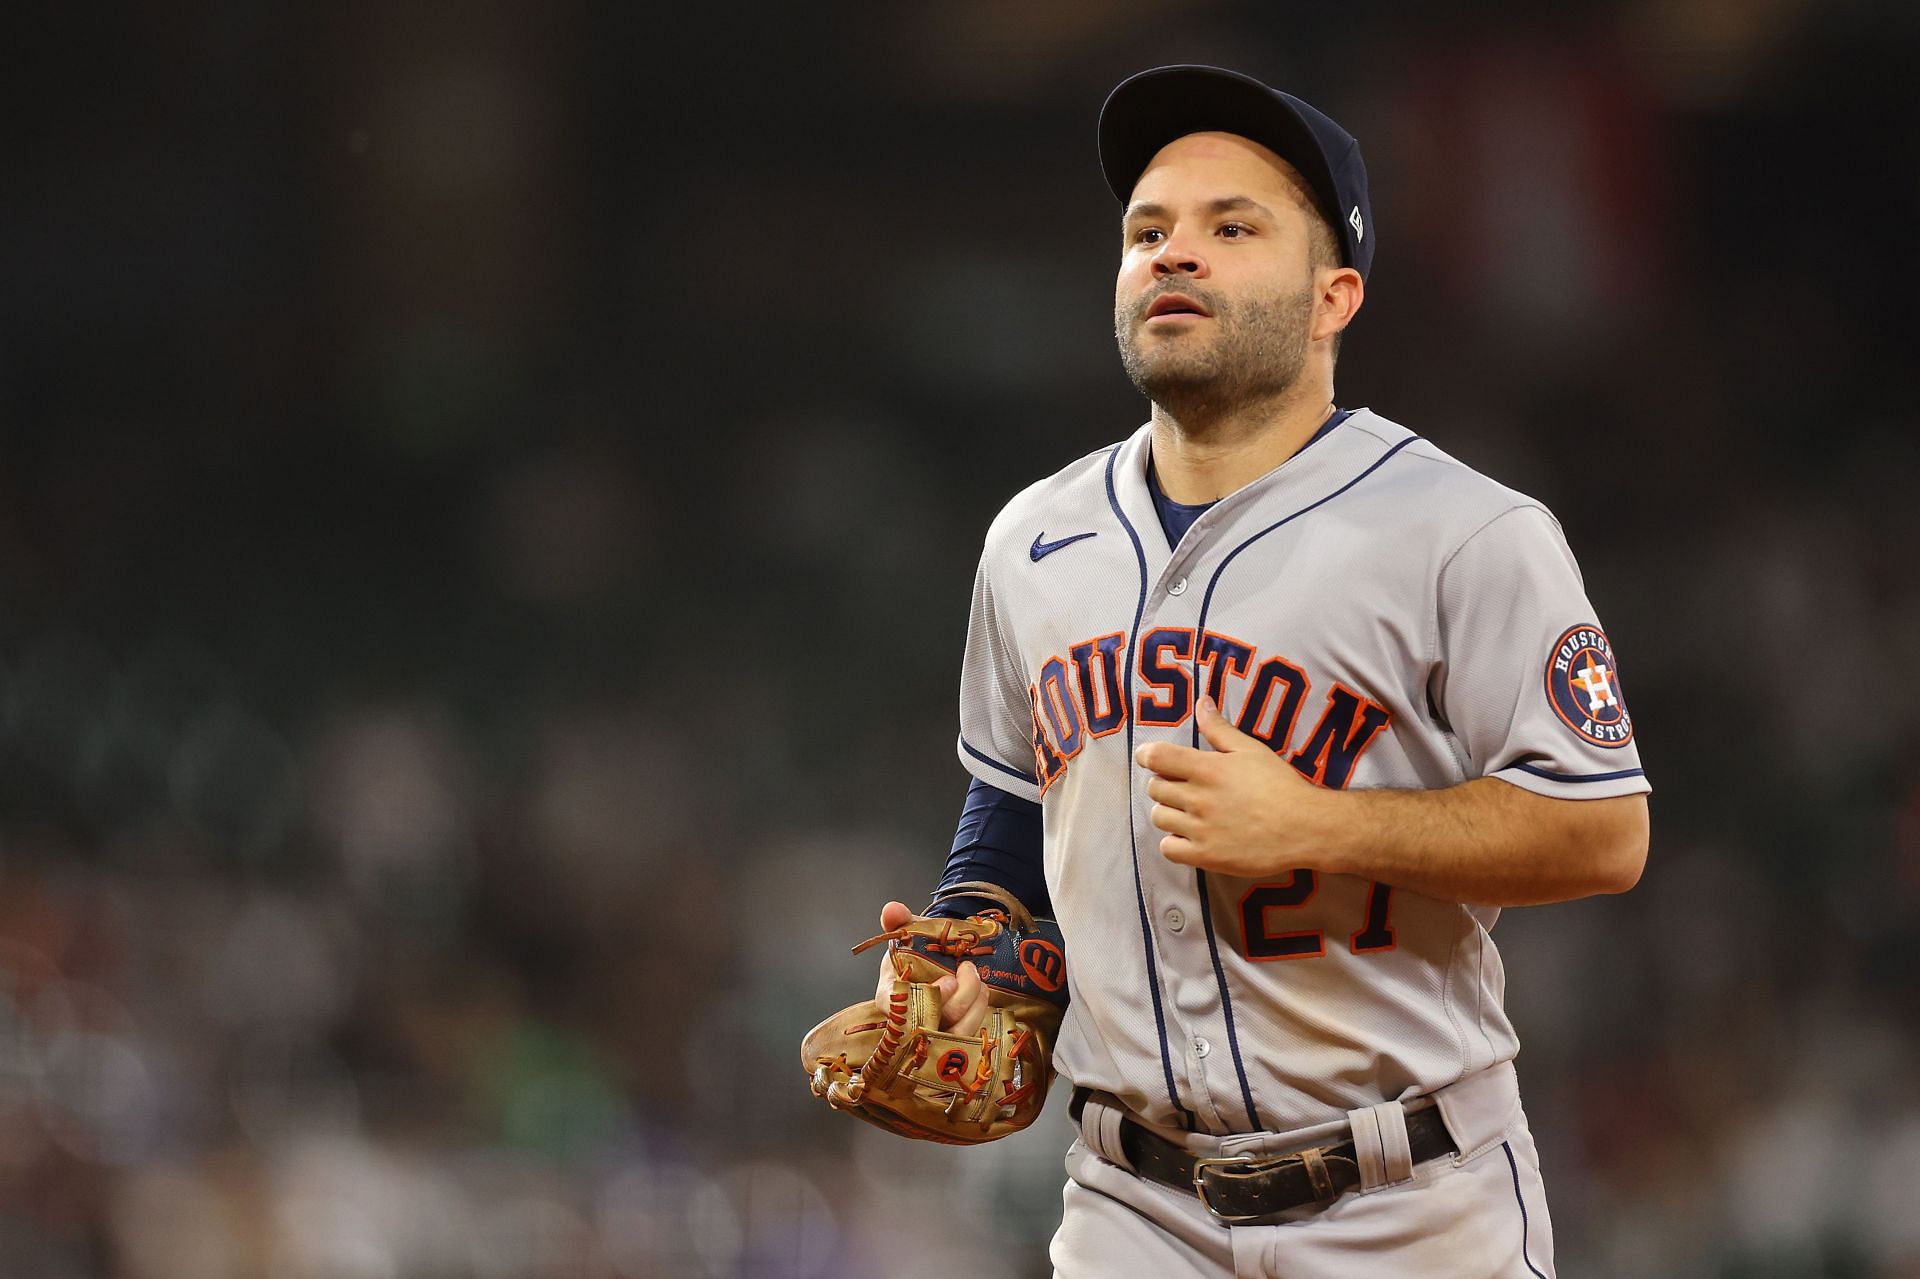 Not every team cheats…. But the Astros sure did Cause they're the players  who brought them a parade - MLB Reddit speculates why Houston Astros fans  celebrate tainted players